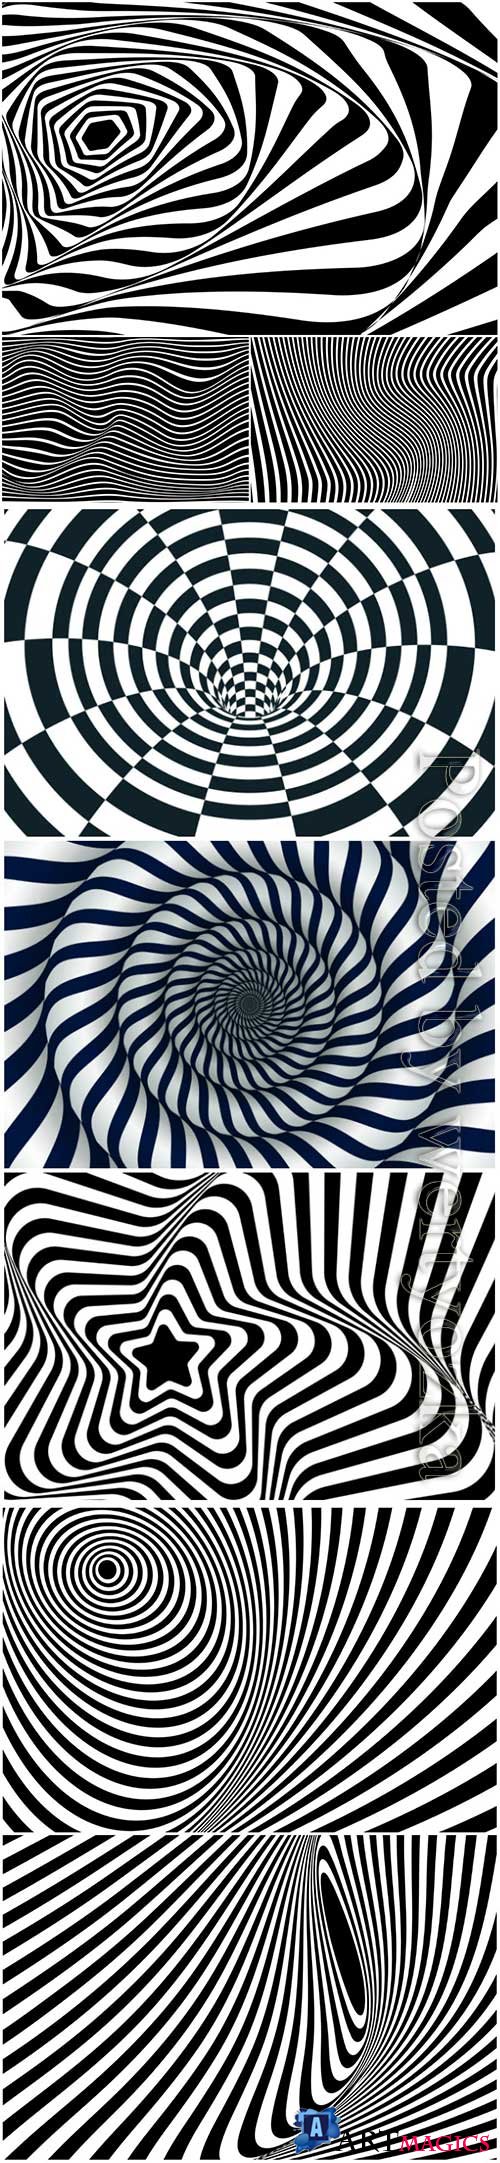 Psychedelic optical illusion vector background # 6